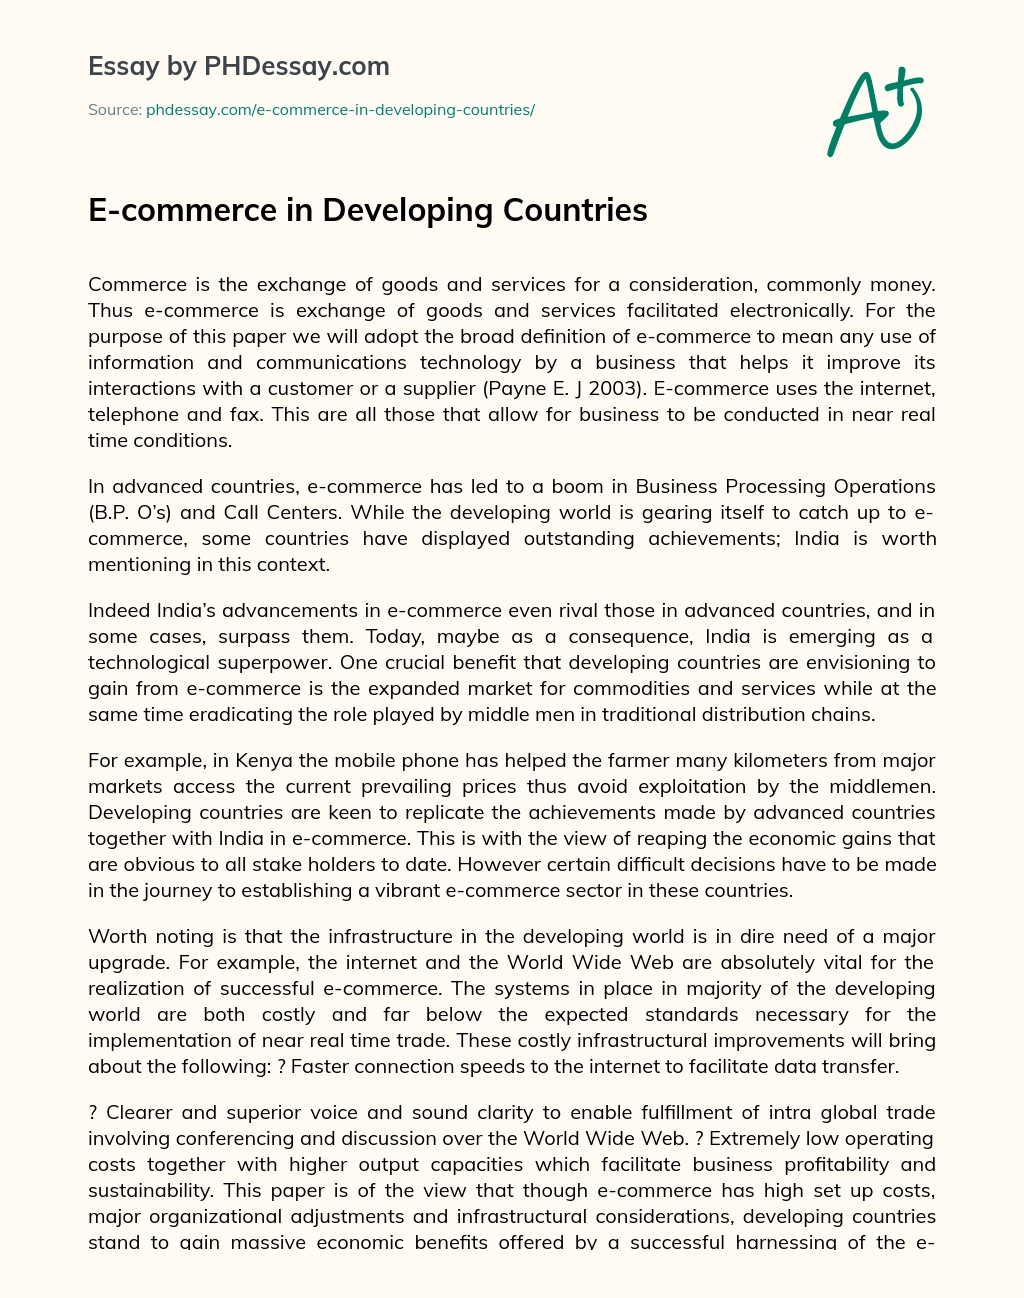 E-commerce in Developing Countries essay